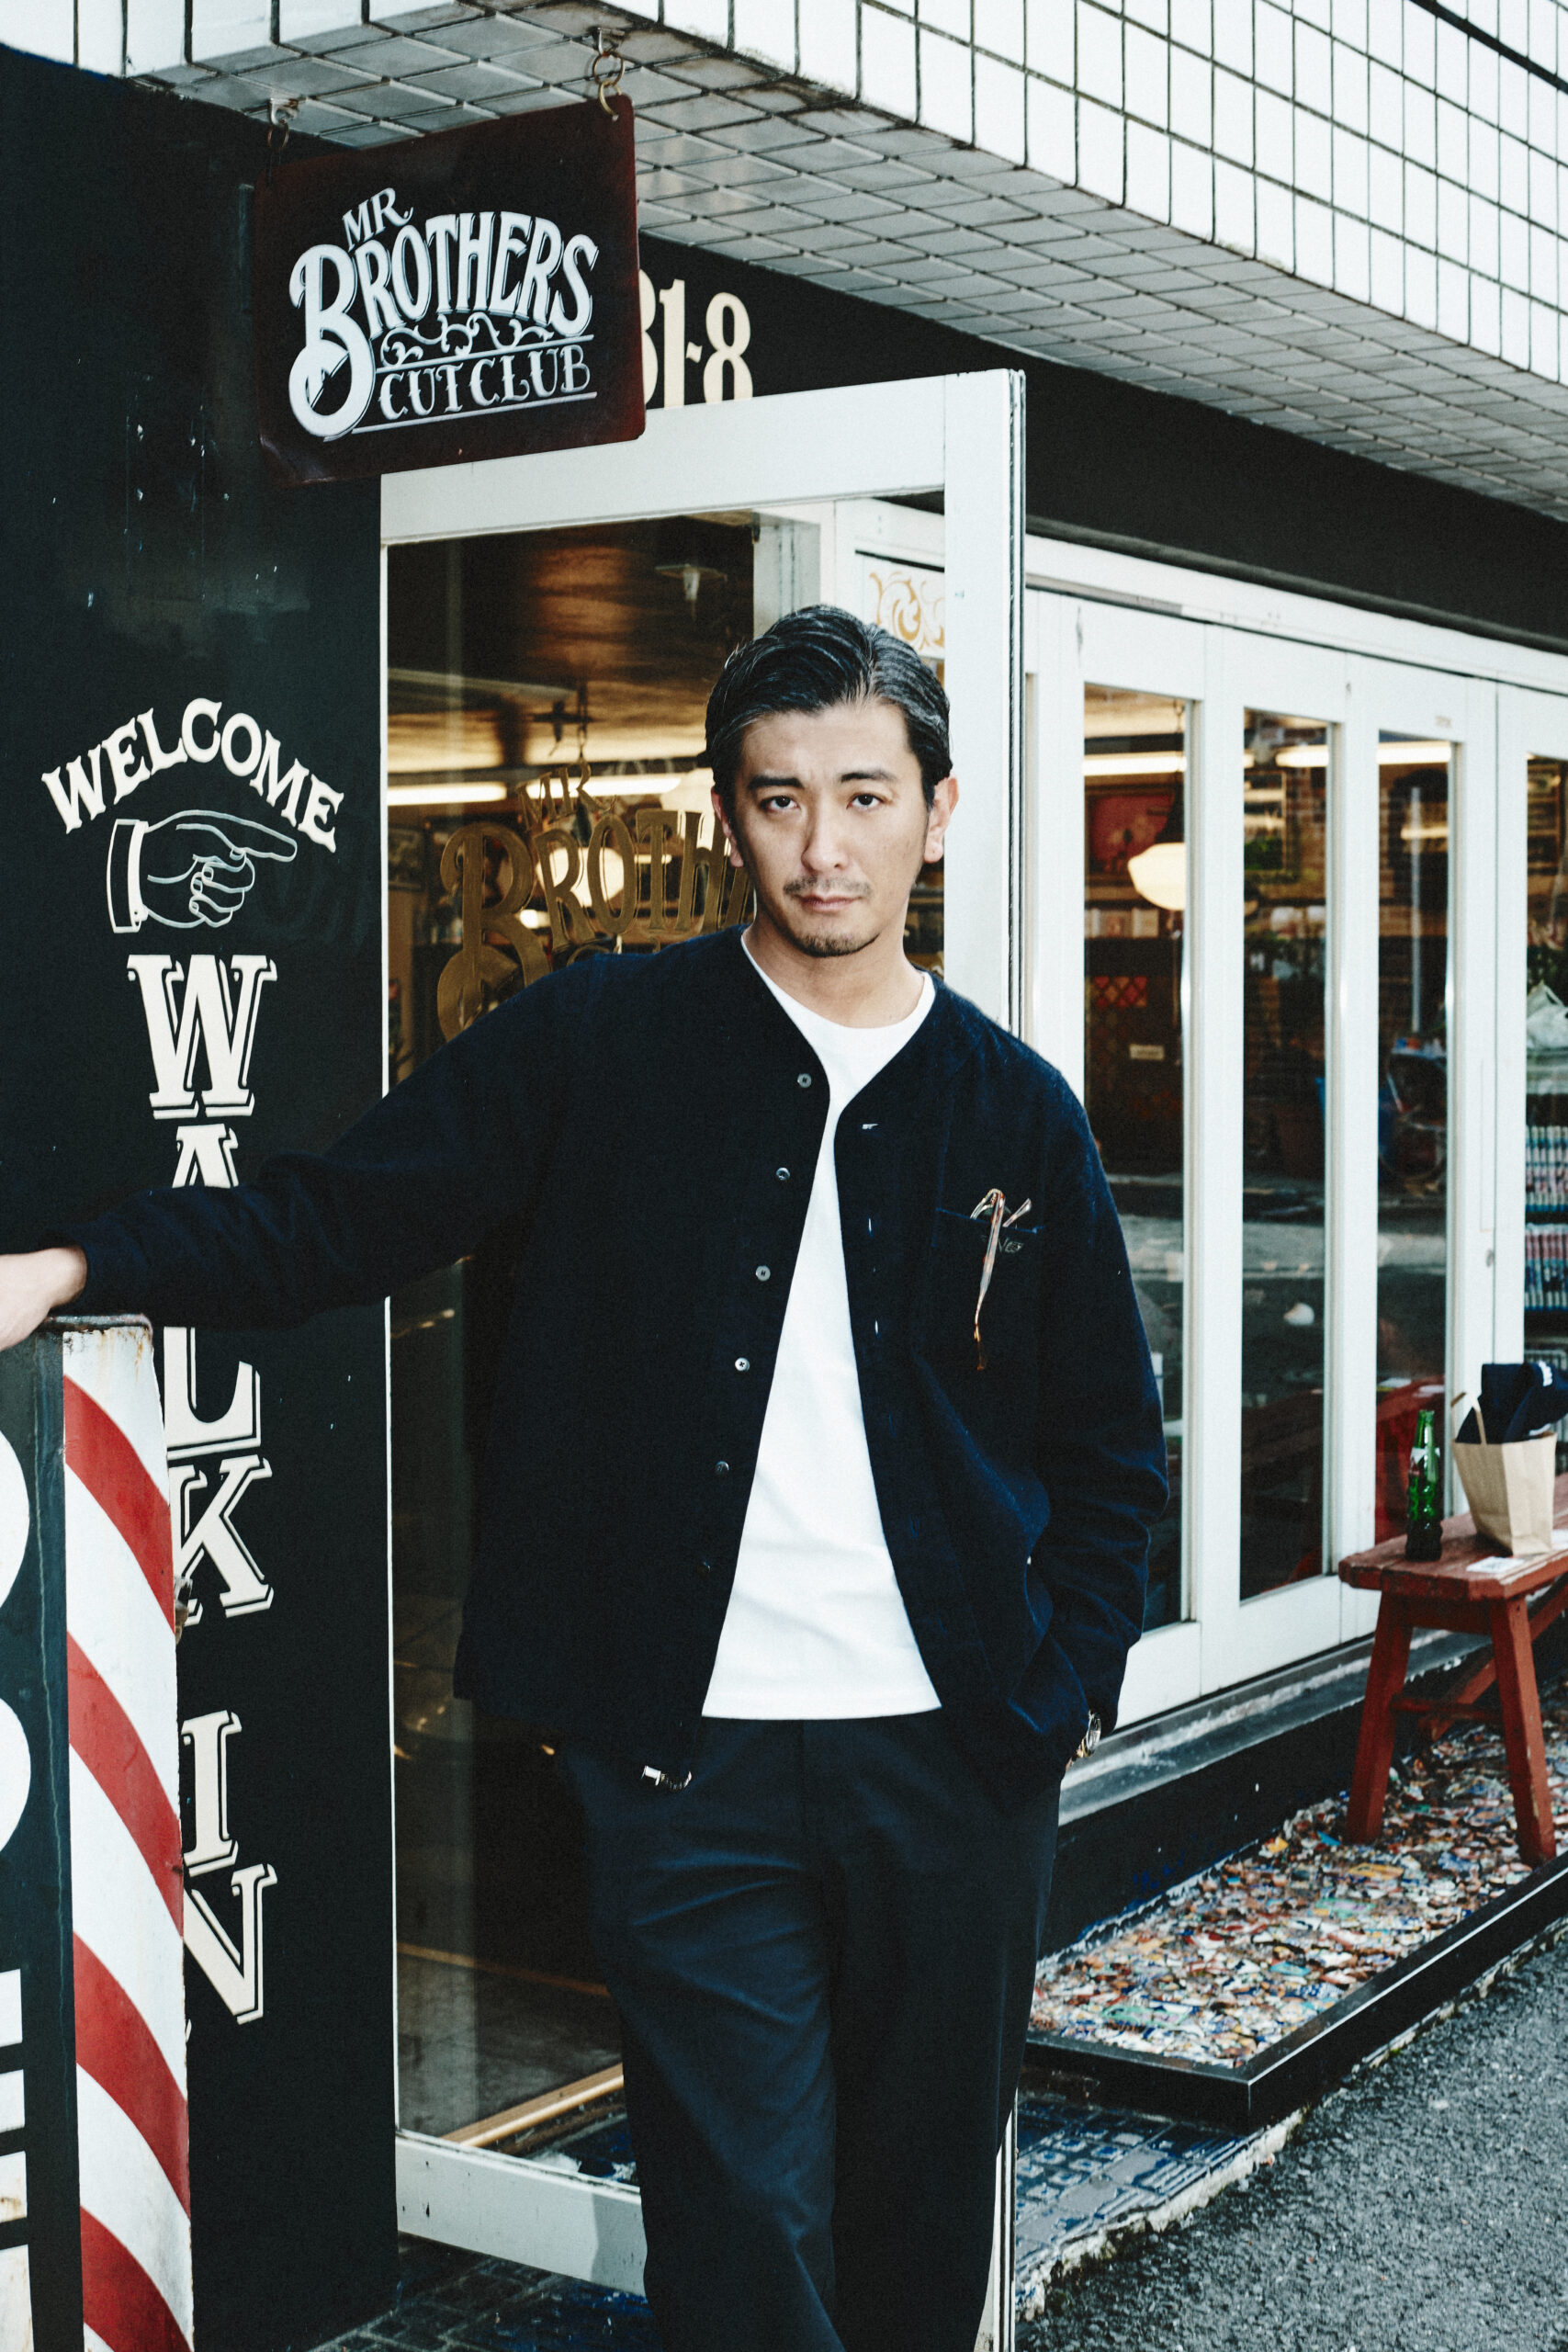 Daisuke Komatsu of Mr. Brothers Cut Club on Opening a Shop in LA and More